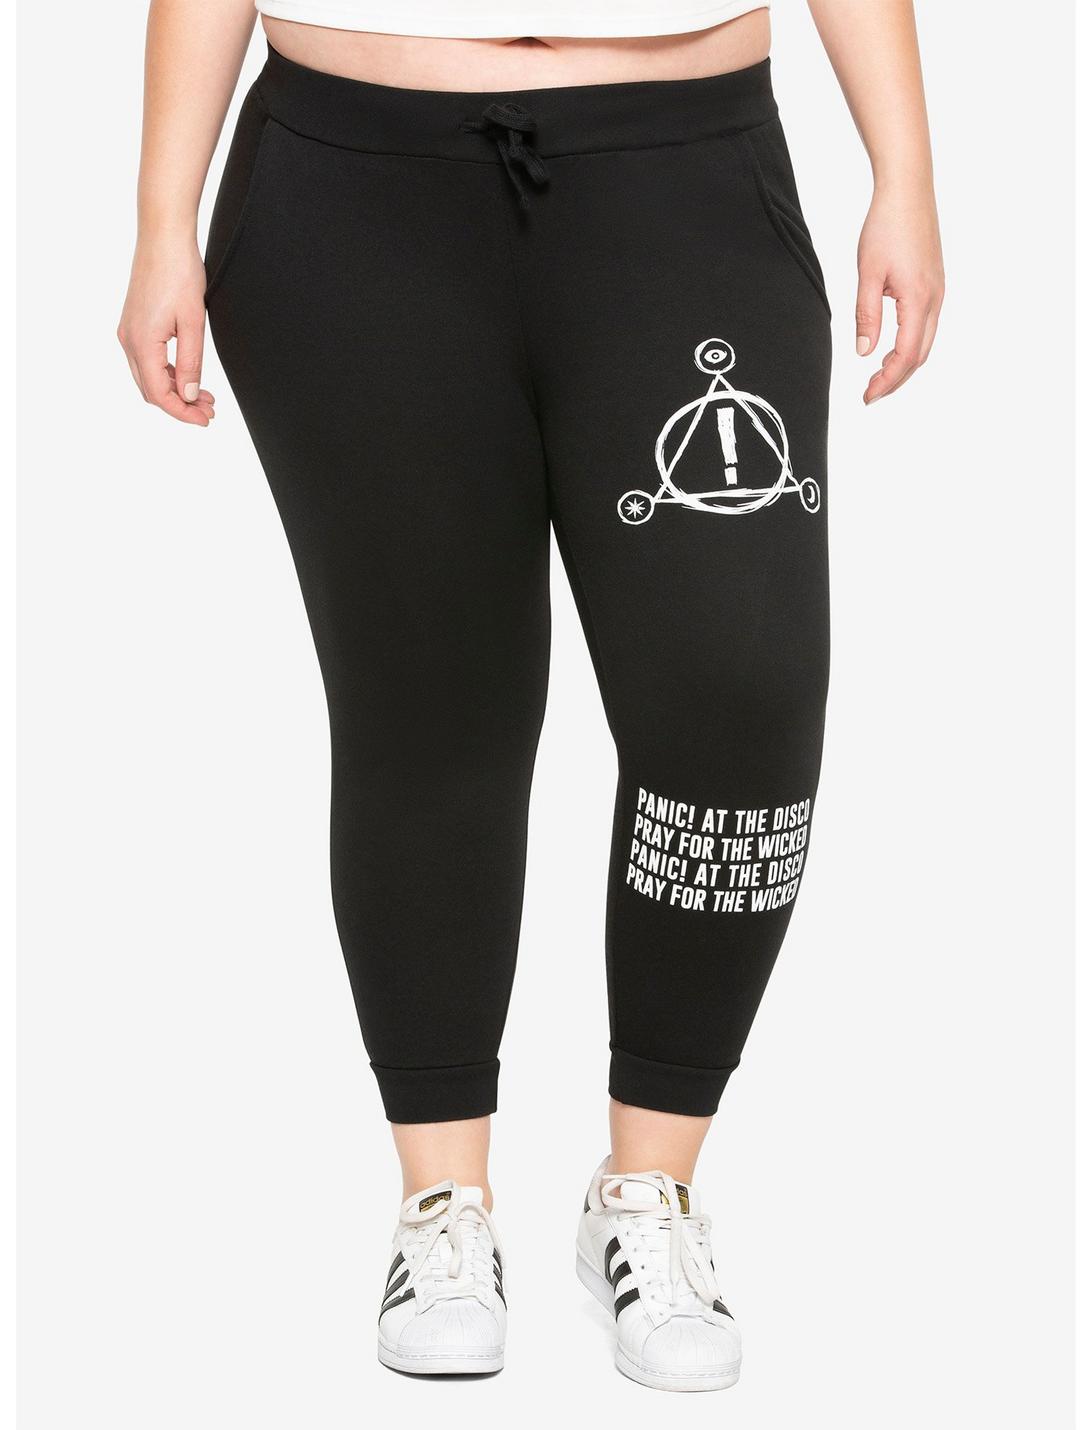 Panic! At The Disco Pray For The Wicked Girls Jogger Pants Plus Size, GREY, hi-res